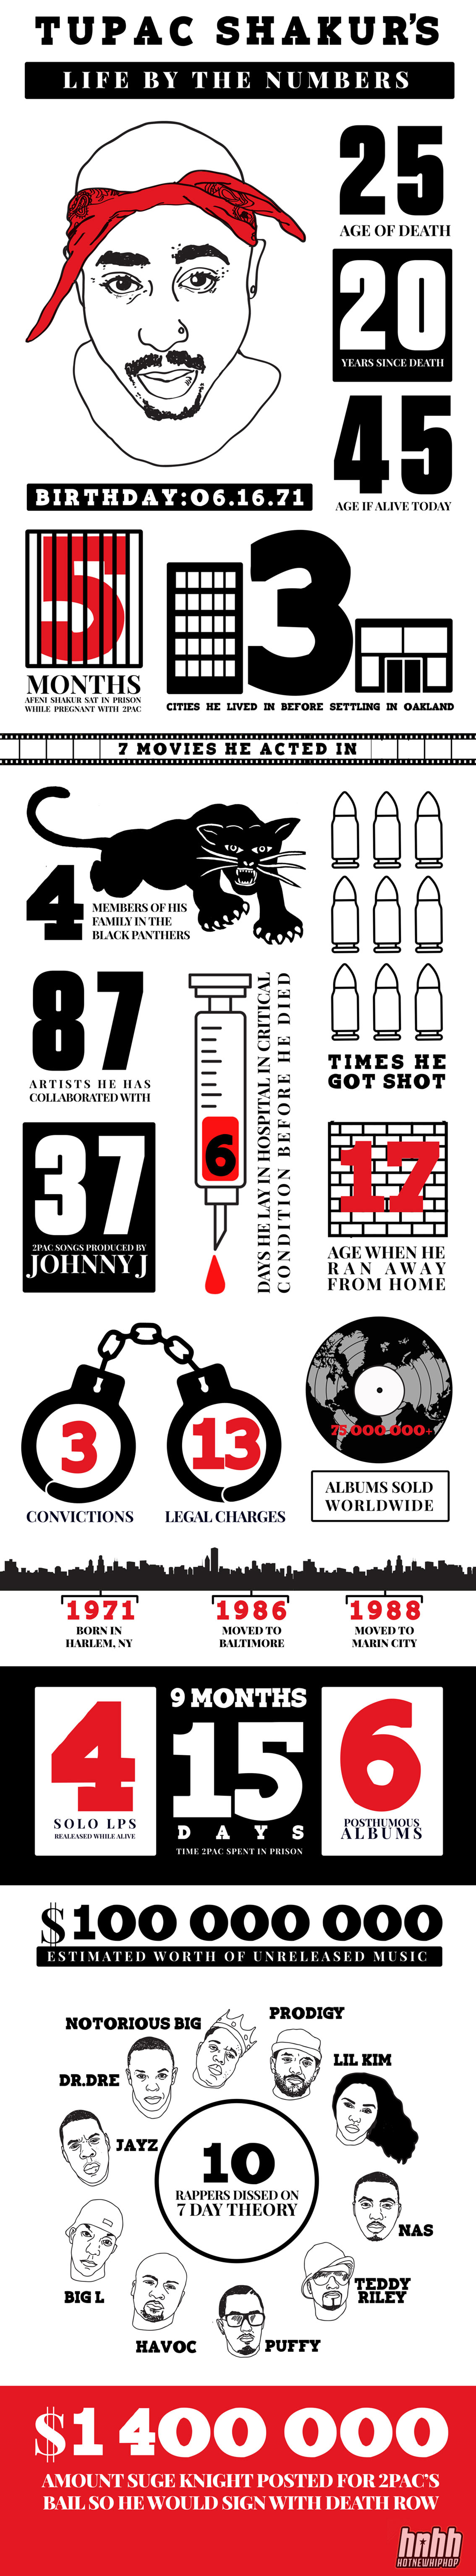 Tupac Shakur Life by the Numbers - Rap Infographic